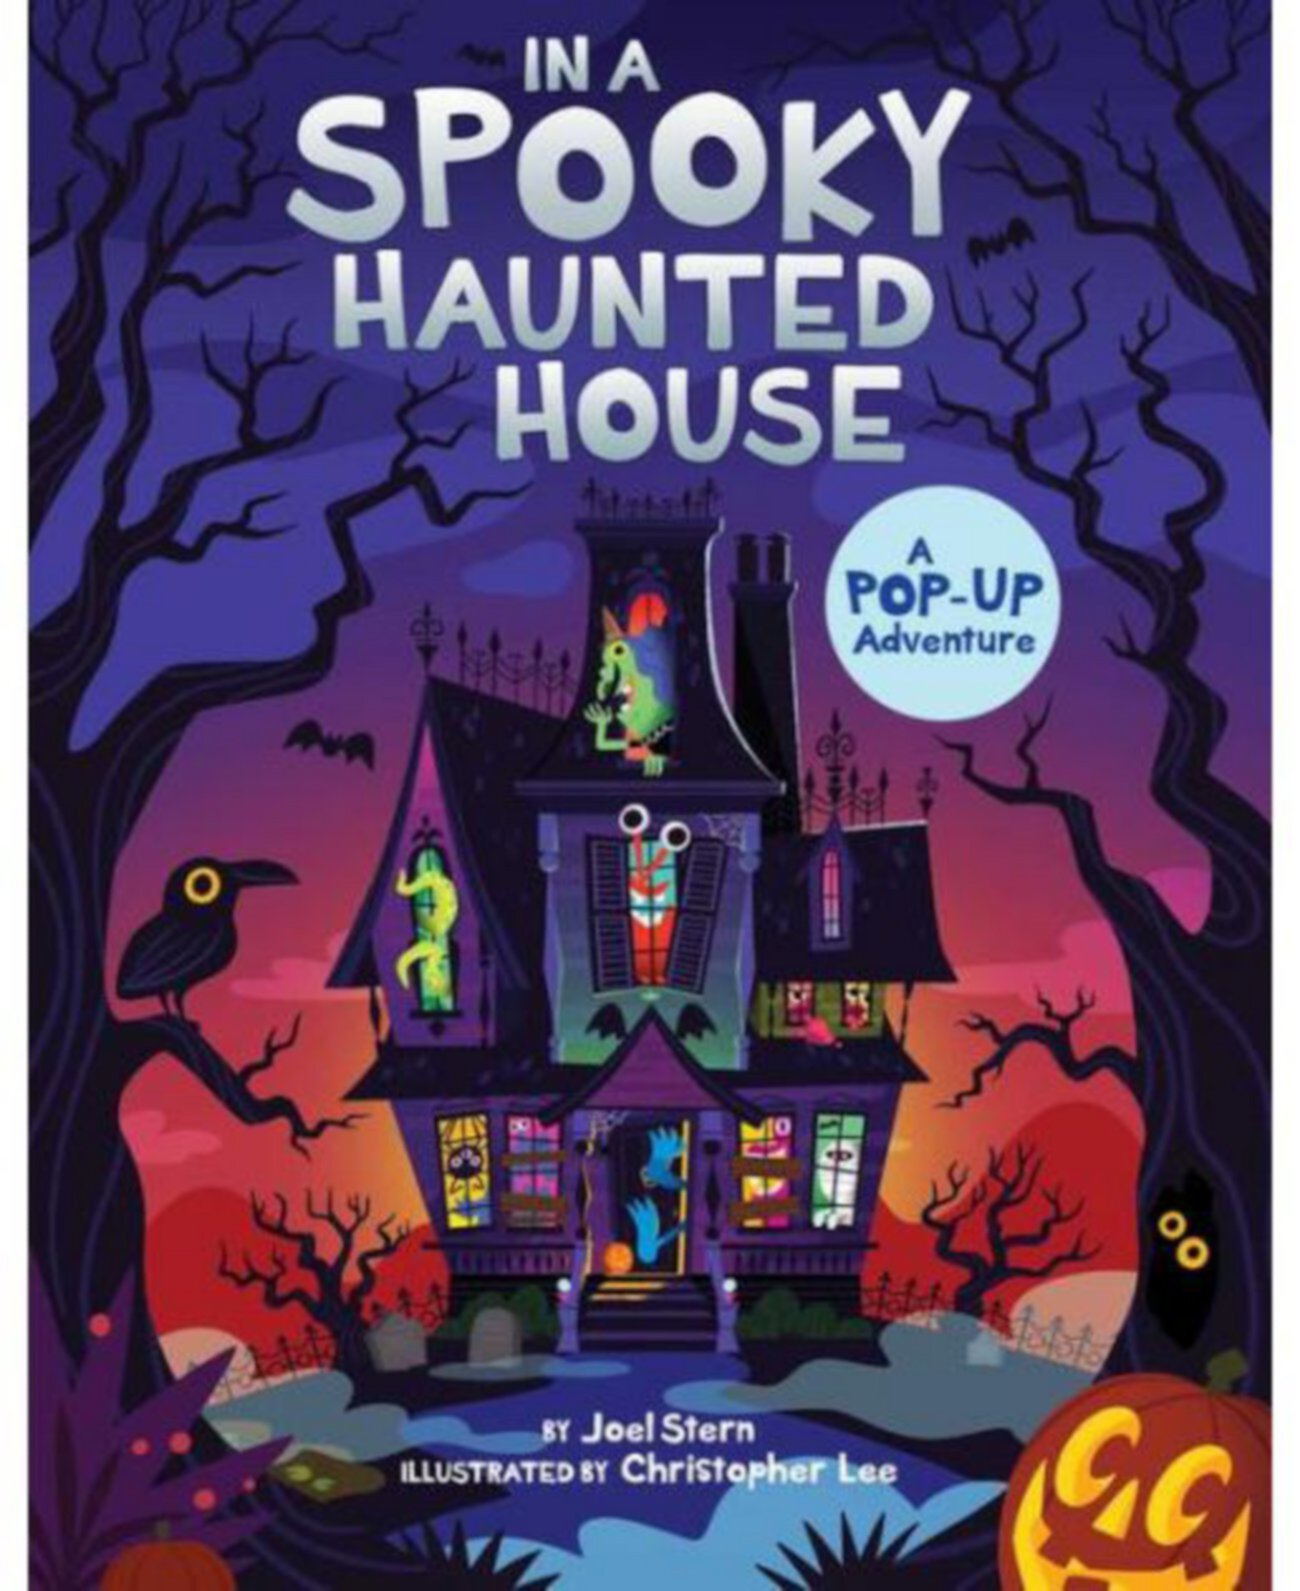 In a Spooky Haunted House- A Pop-Up Adventure by Joel Stern Barnes & Noble